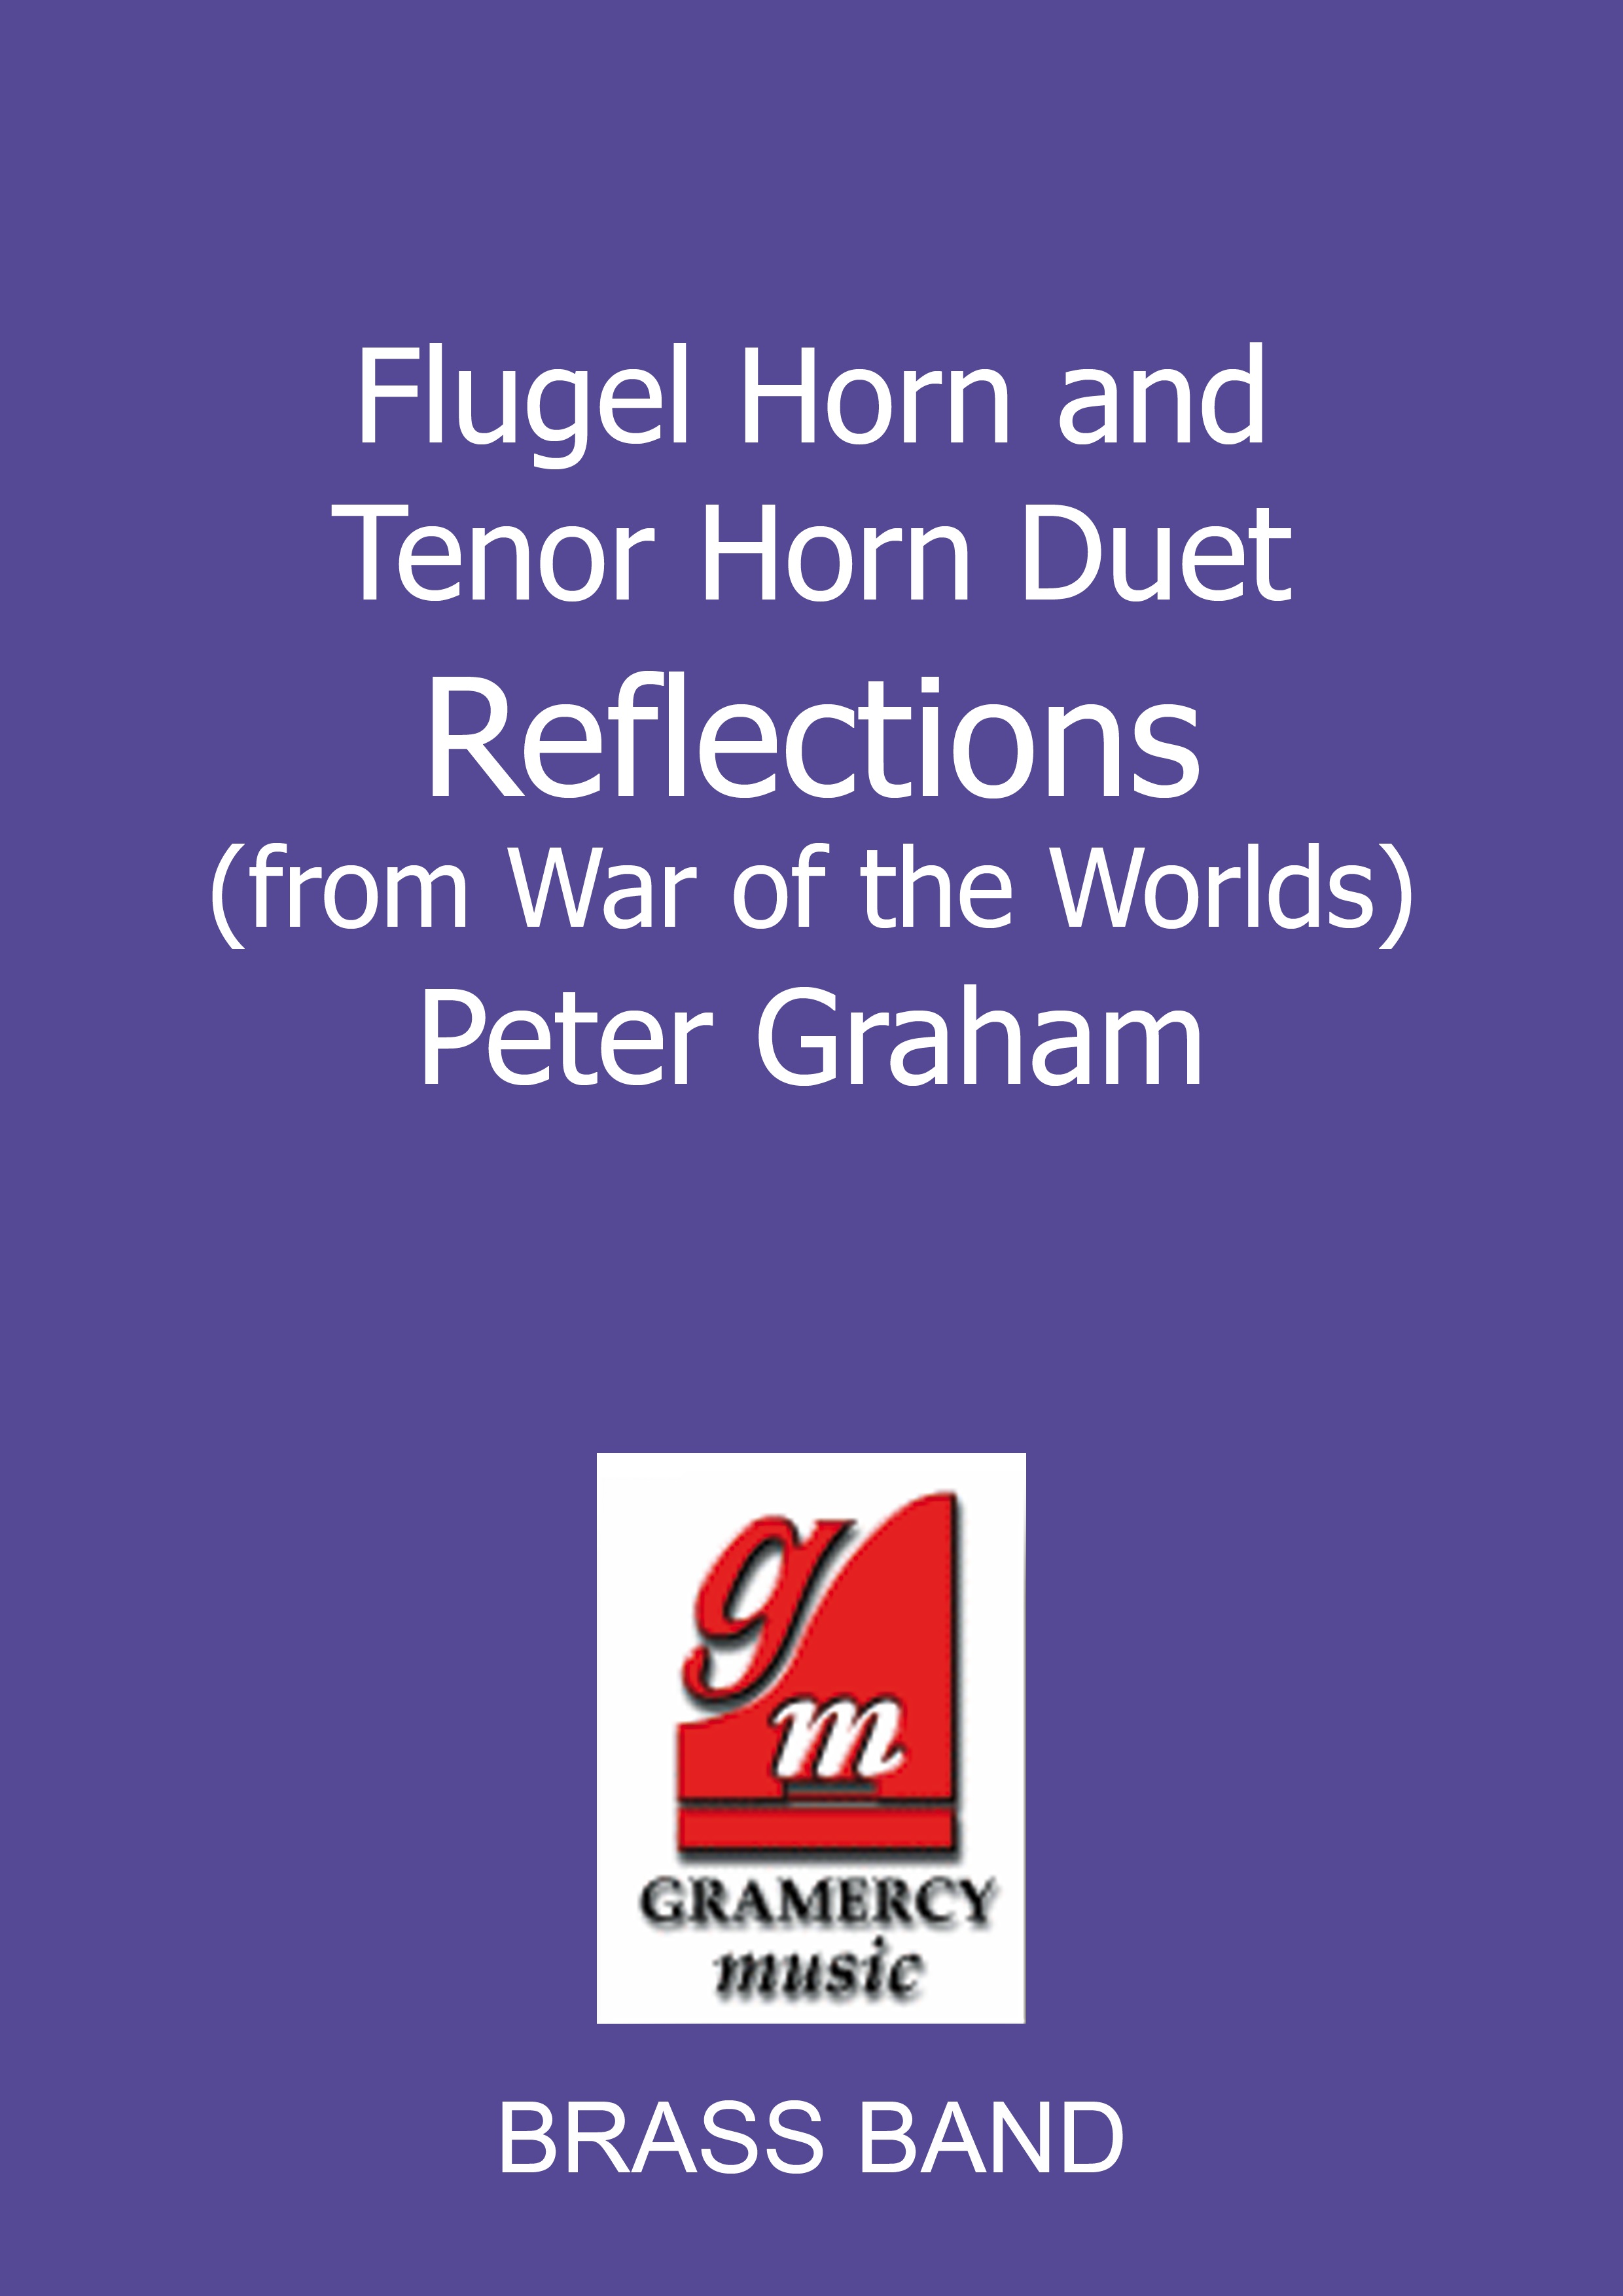 Reflections (Flugel and Tenor Horn Duet with Brass Band)